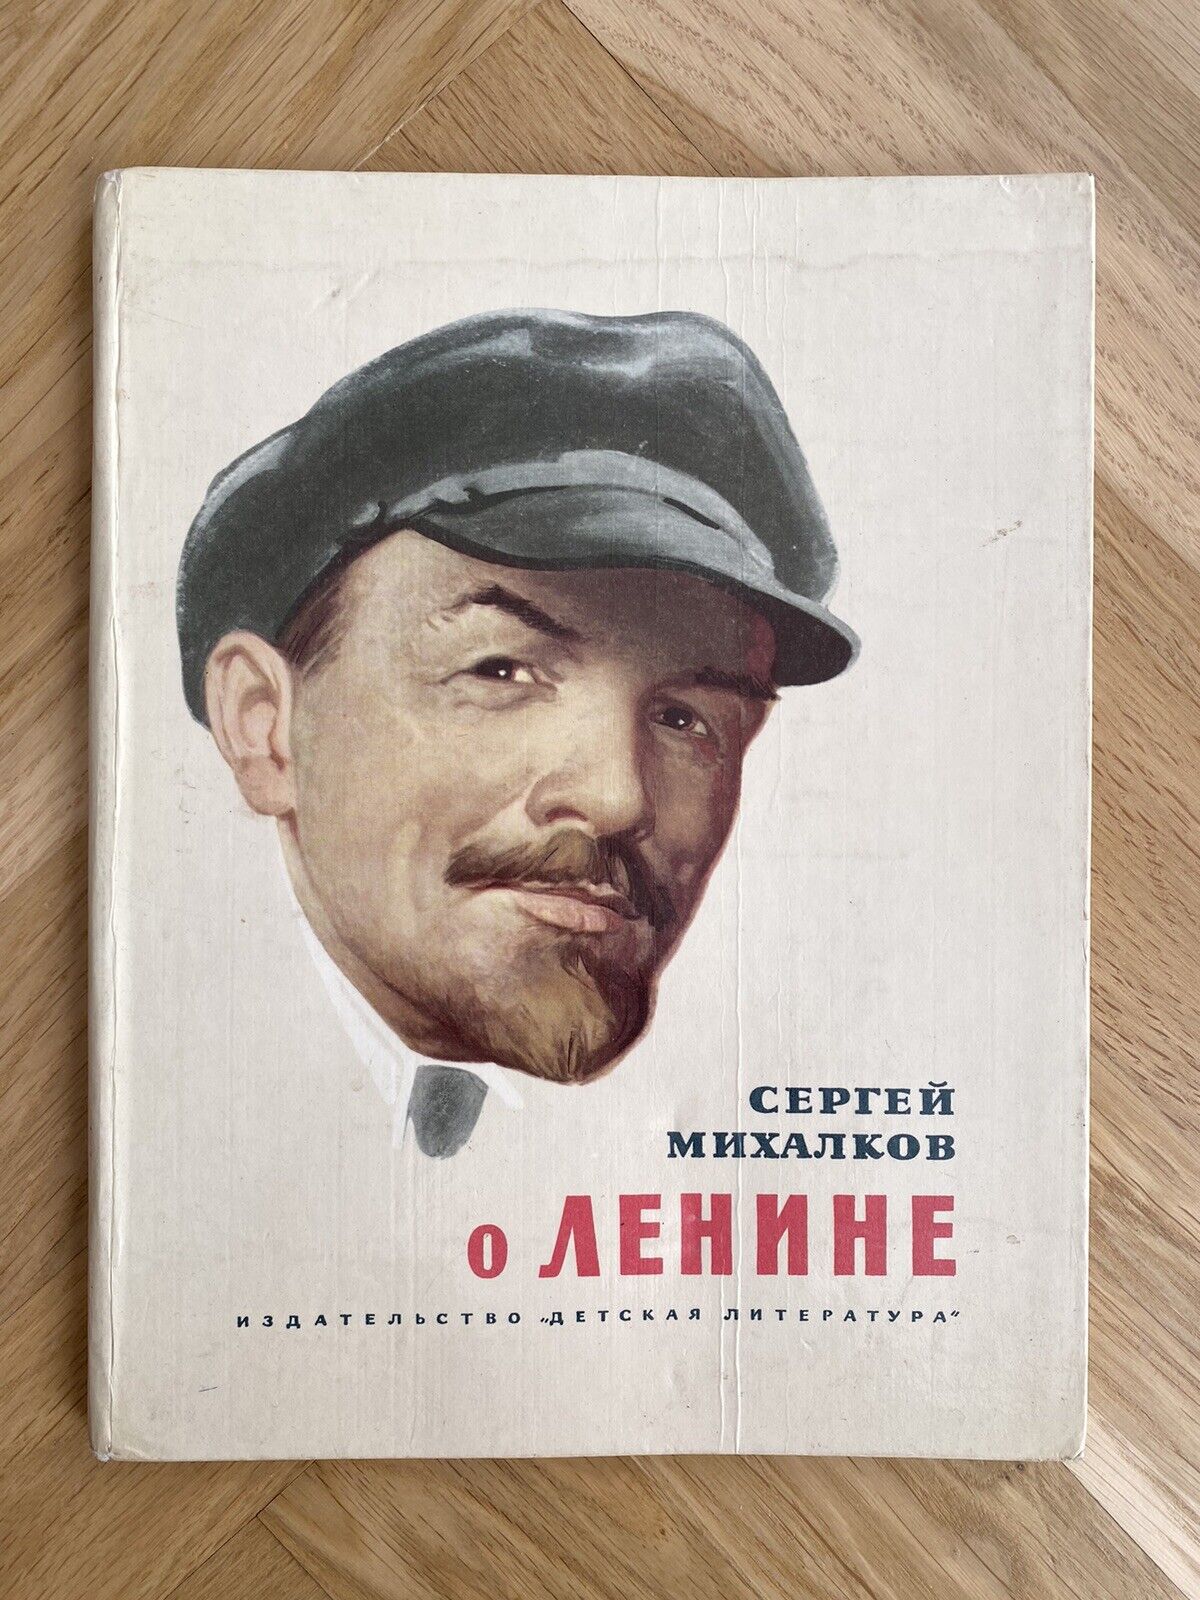 Rare Vintage Children's Book Stories About the Lenin of the USSR Propaganda